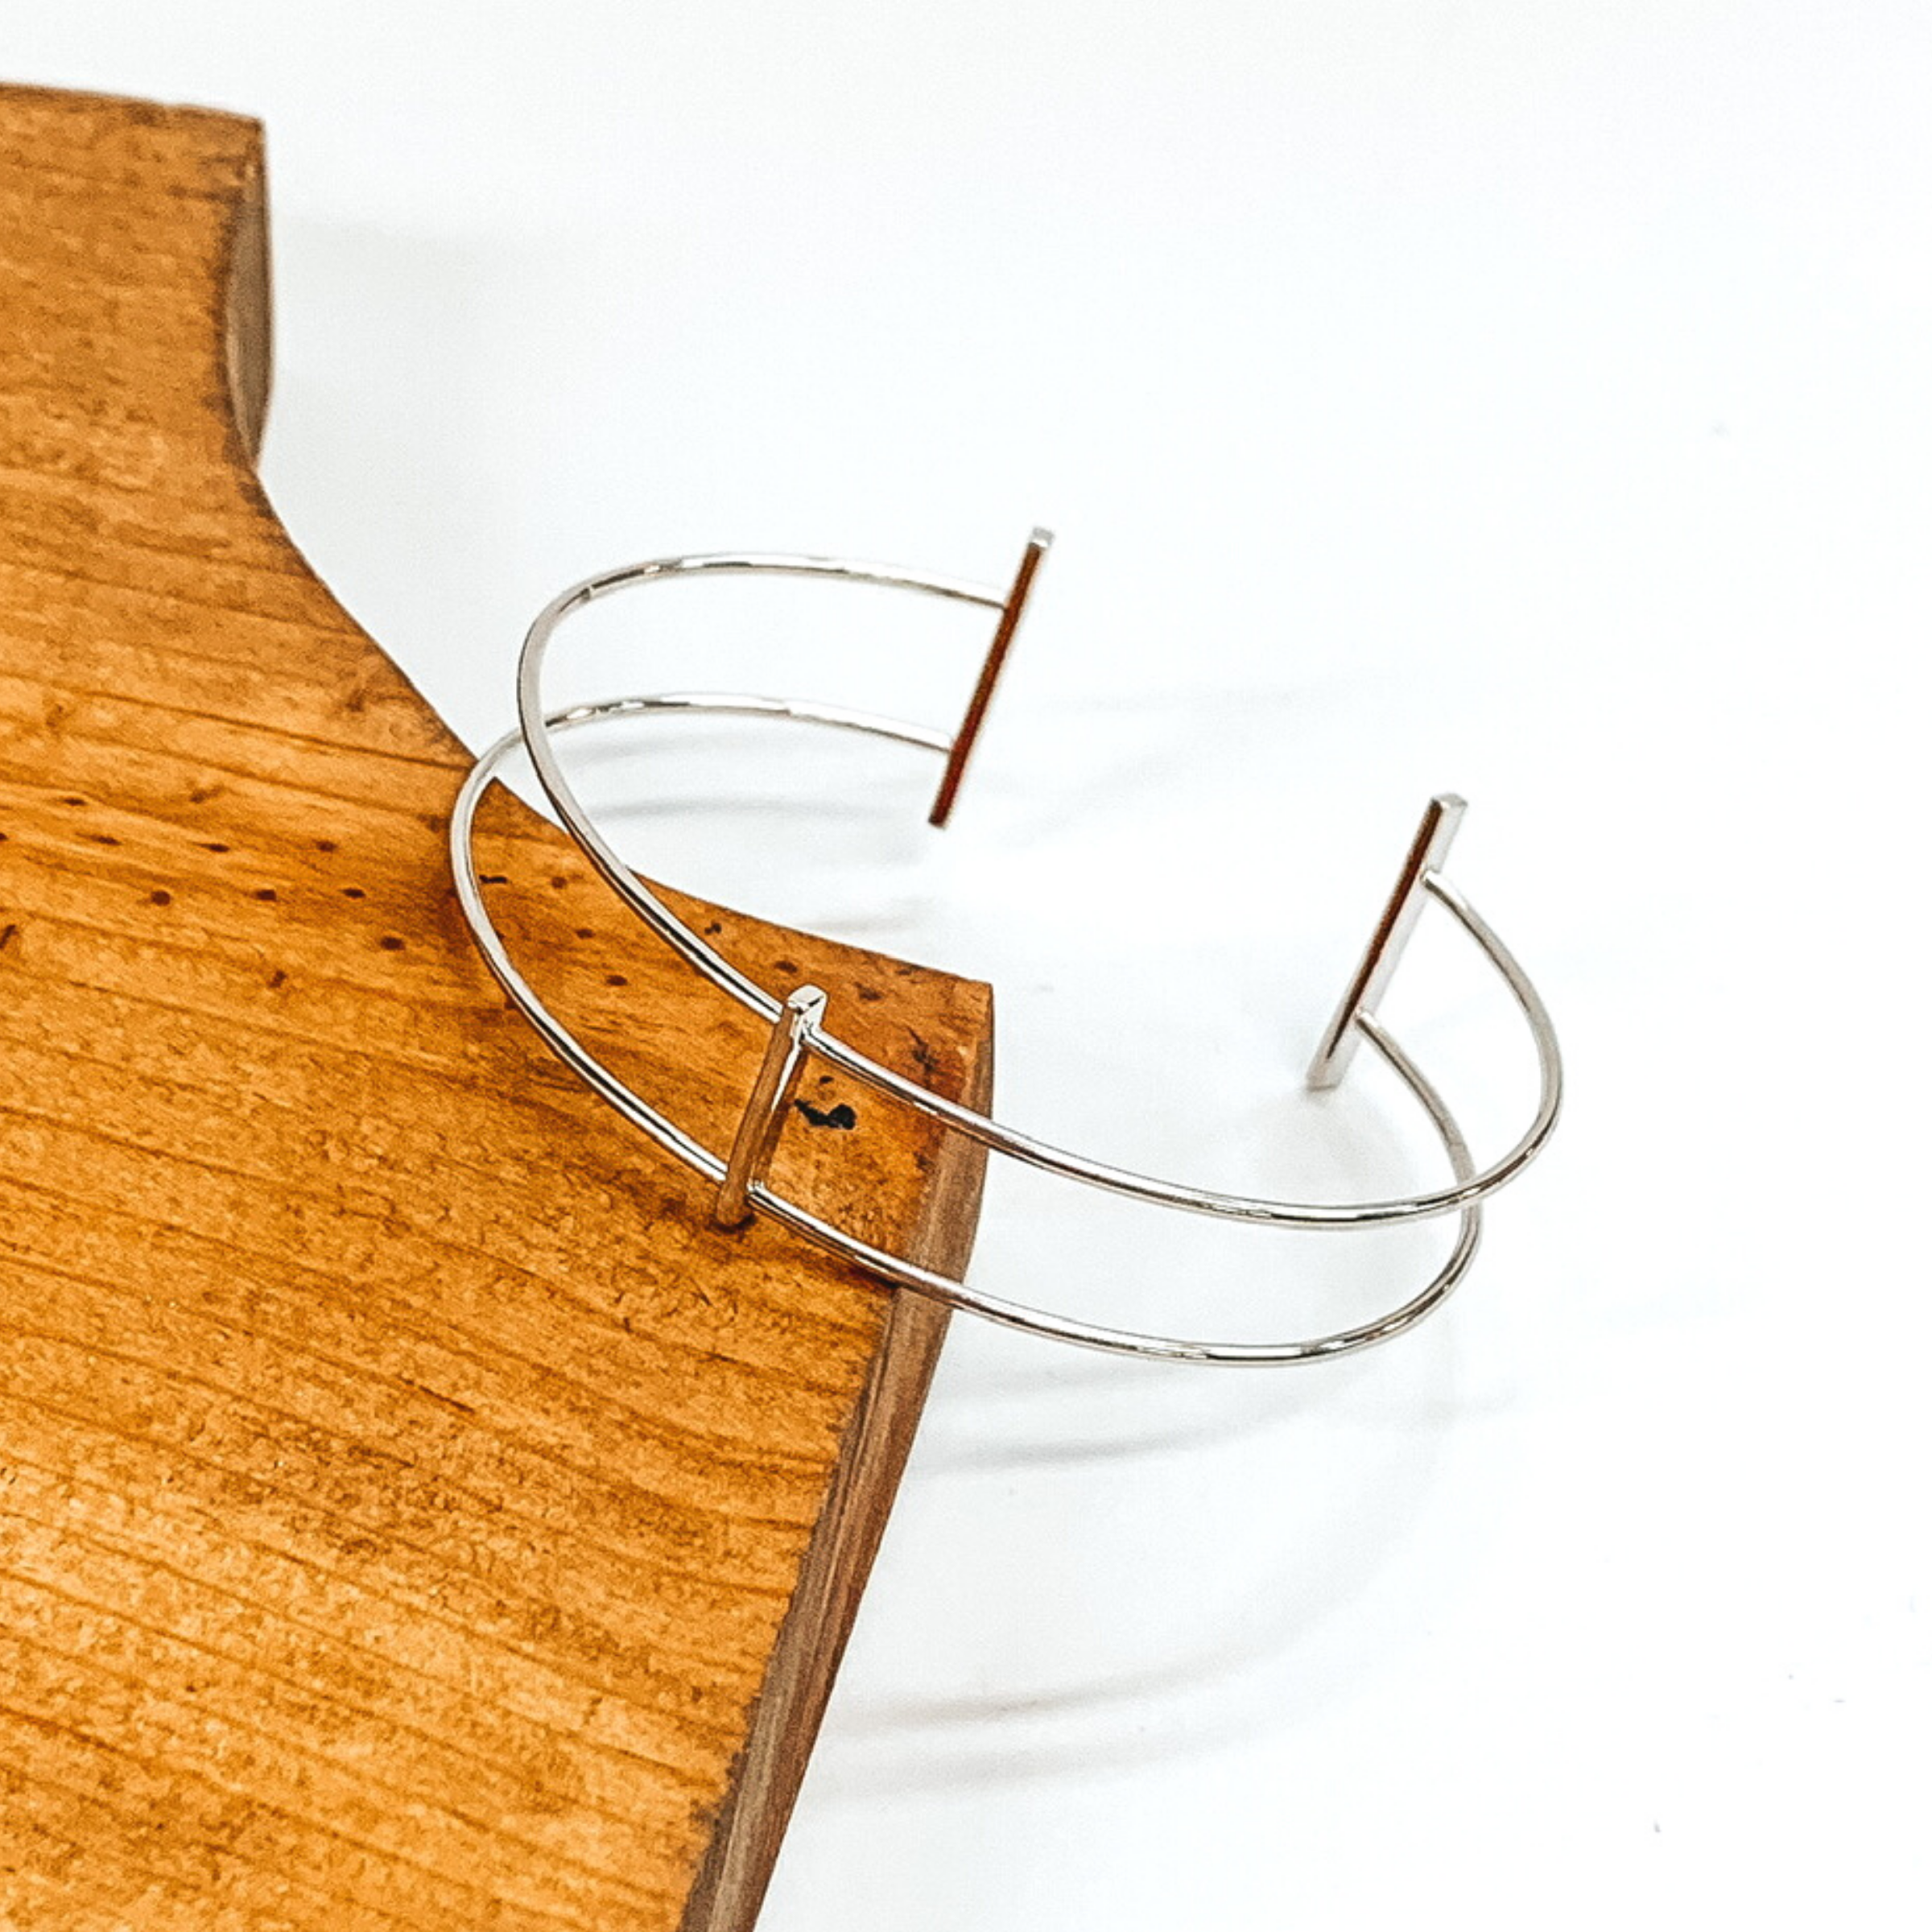 Thin, double wire bangle in silver. The center of the bangle is a plain, thin bar connecting the two wires. The ends have two silver bars. This bracelet is pictured laying on a brown block on a white background. 